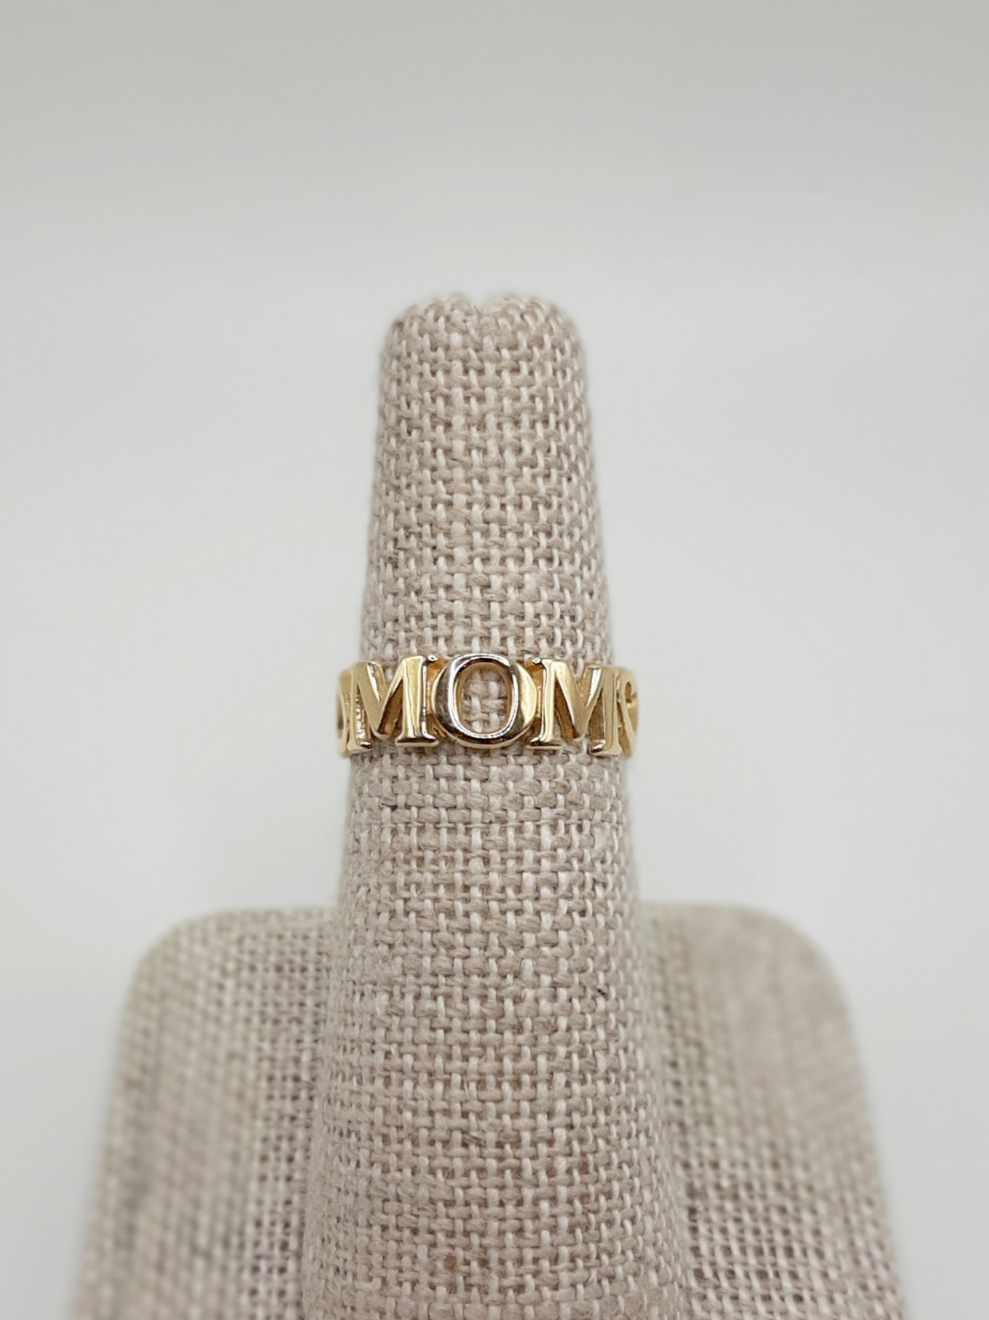 14Kt Yellow Gold Ring Featuring MOM and Hearts